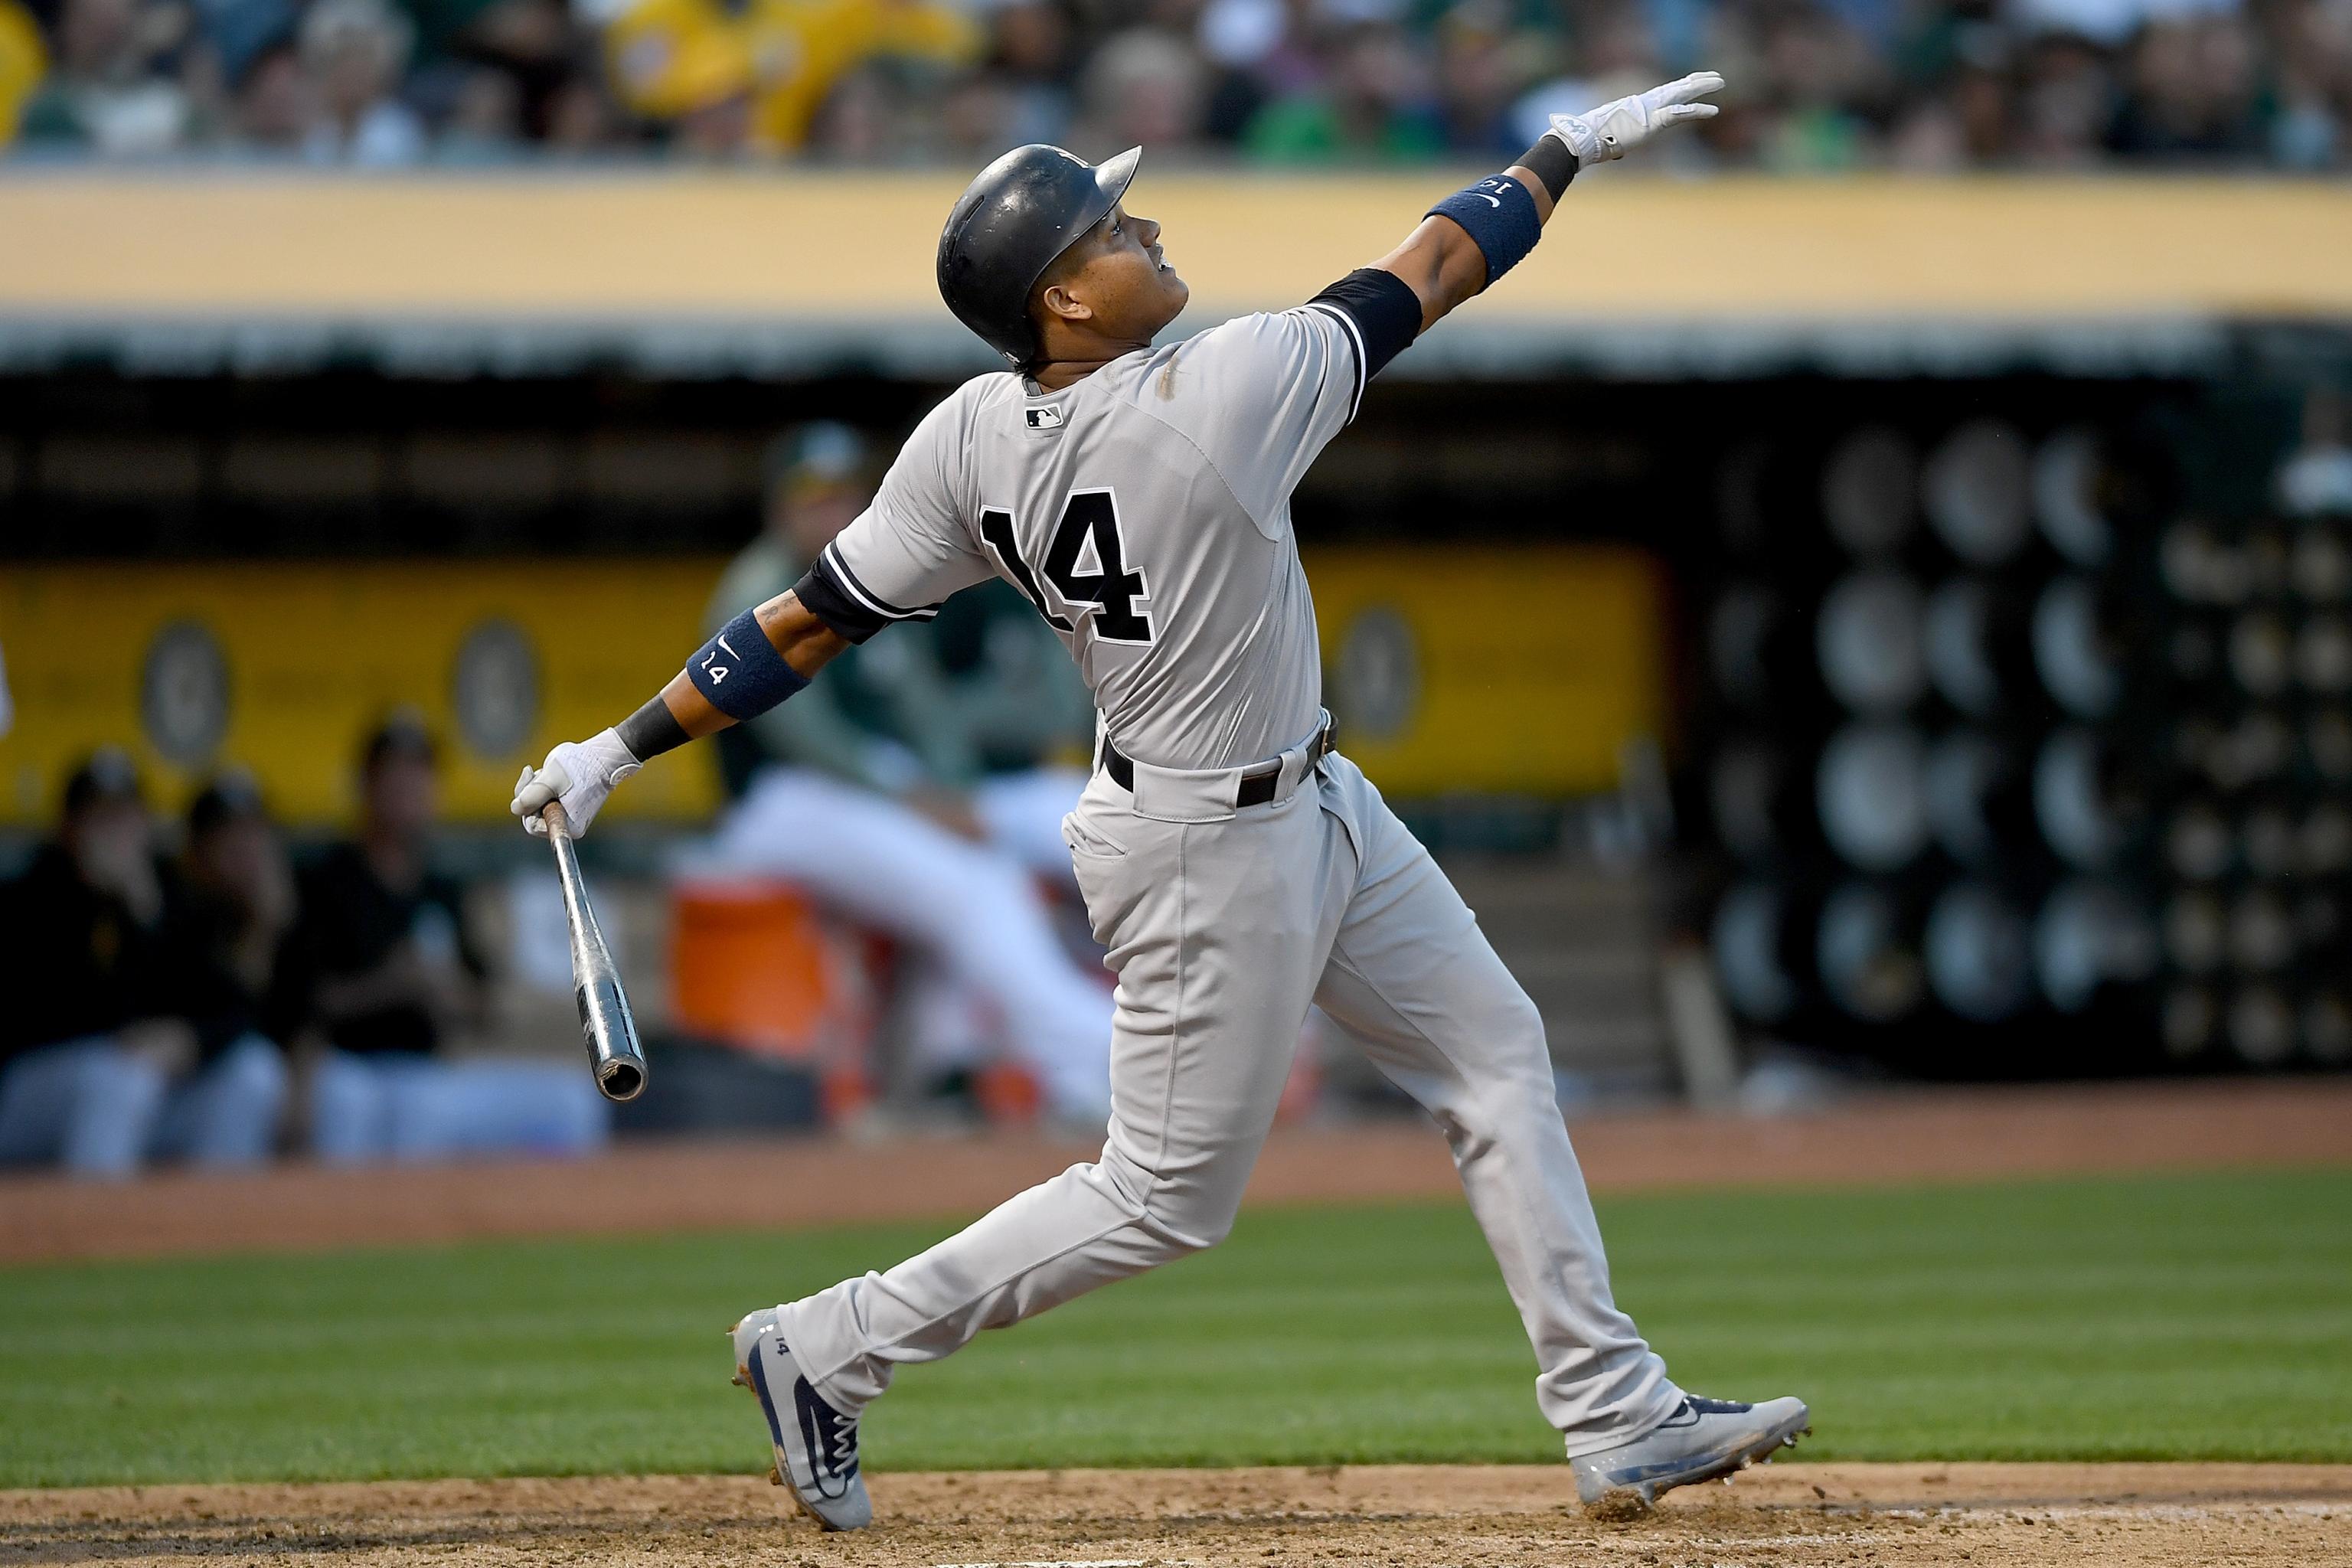 Cubs call up top prospect SS Starlin Castro - The San Diego Union-Tribune